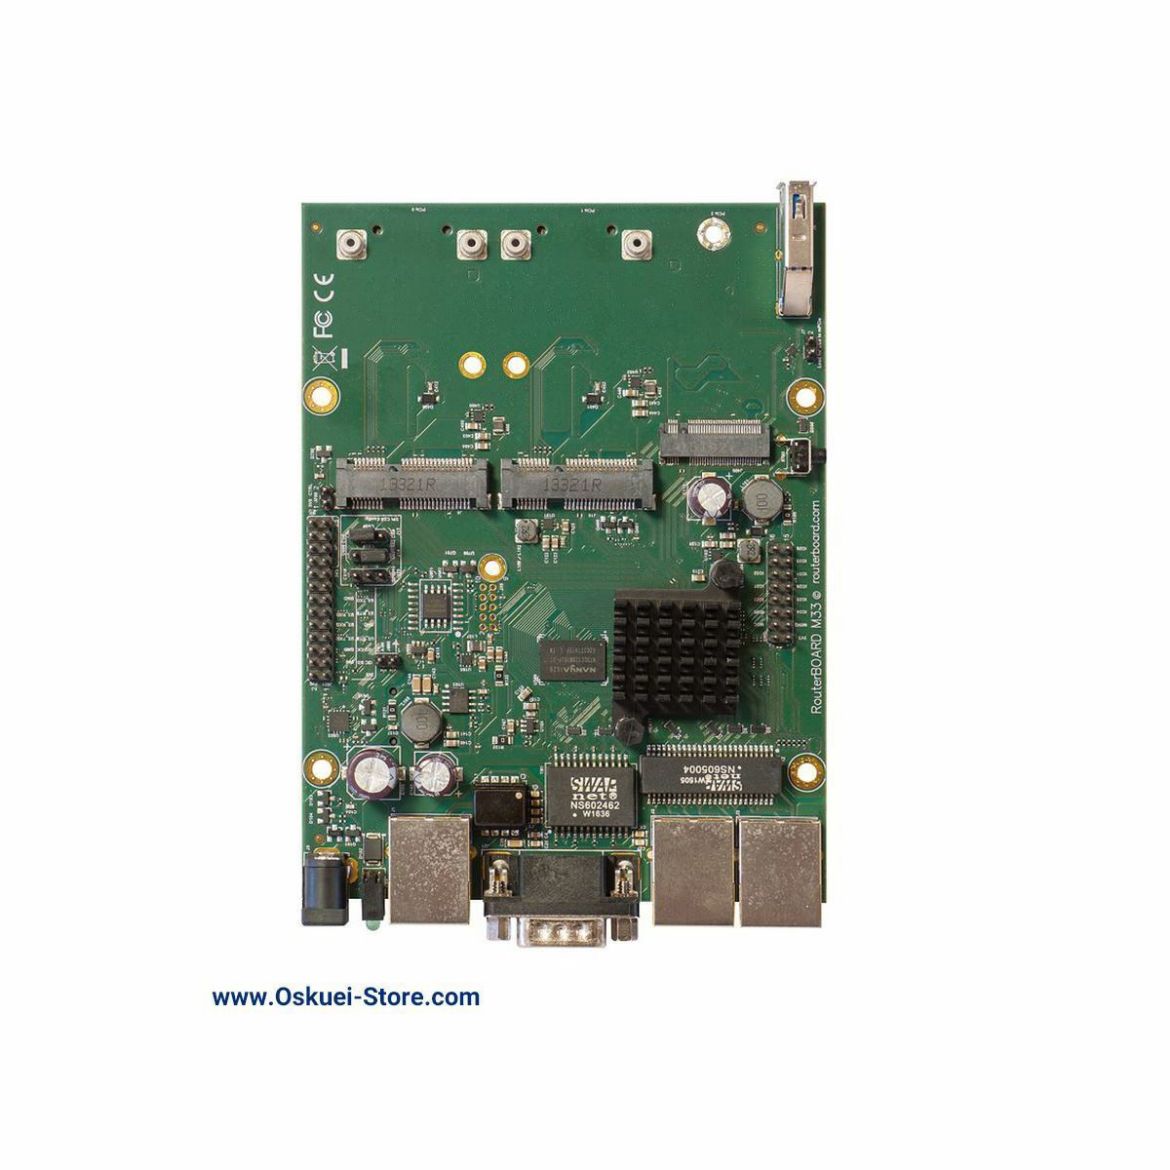 MikroTik RBM33G Router Board Front